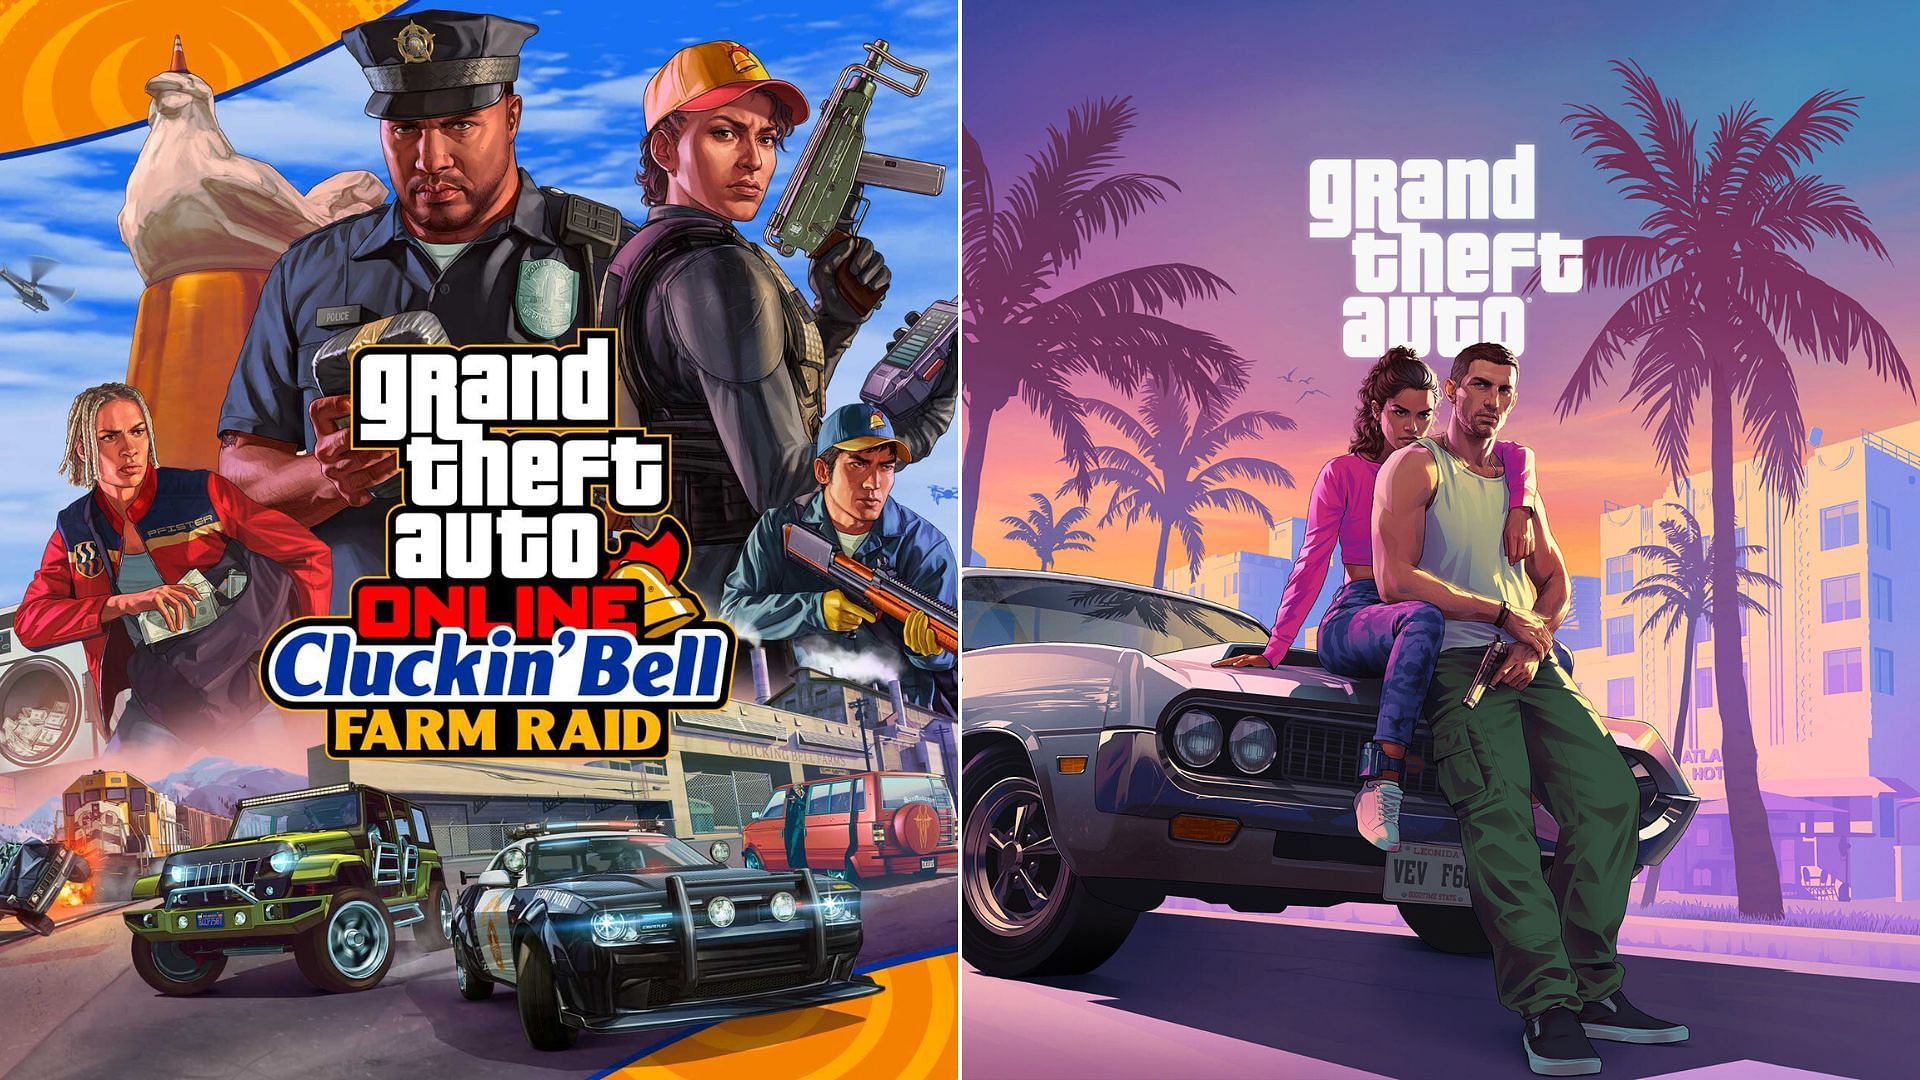 A brief report on the ongoing rumor of GTA Online Cluckin Bell Farm Raid including one GTA 6 asset (Image via Rockstar Games)